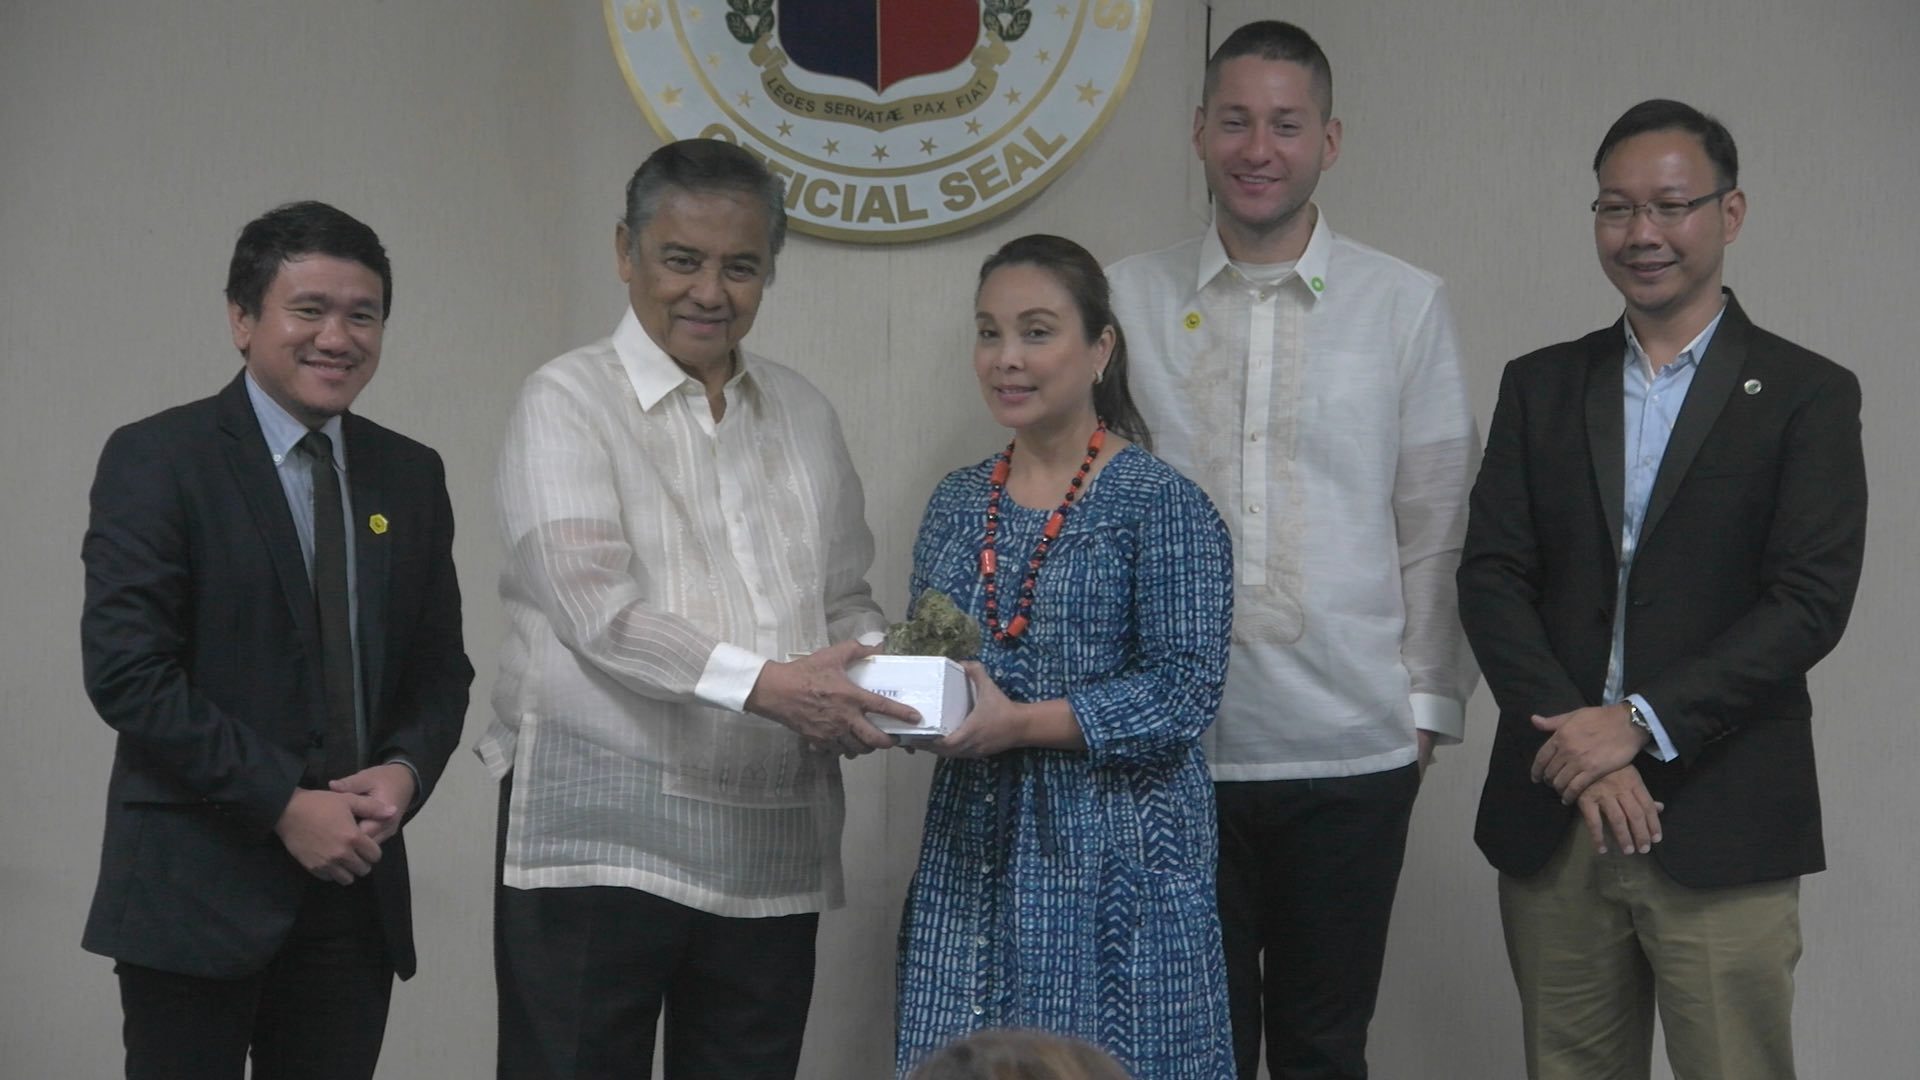 LUNTIANG KAPAWA. Senator Loren Legarda accepts the Luntiang Kapawa Award for shepherding the Senate's concurrence to the ratification of the historic Paris Agreement on Climate Change   